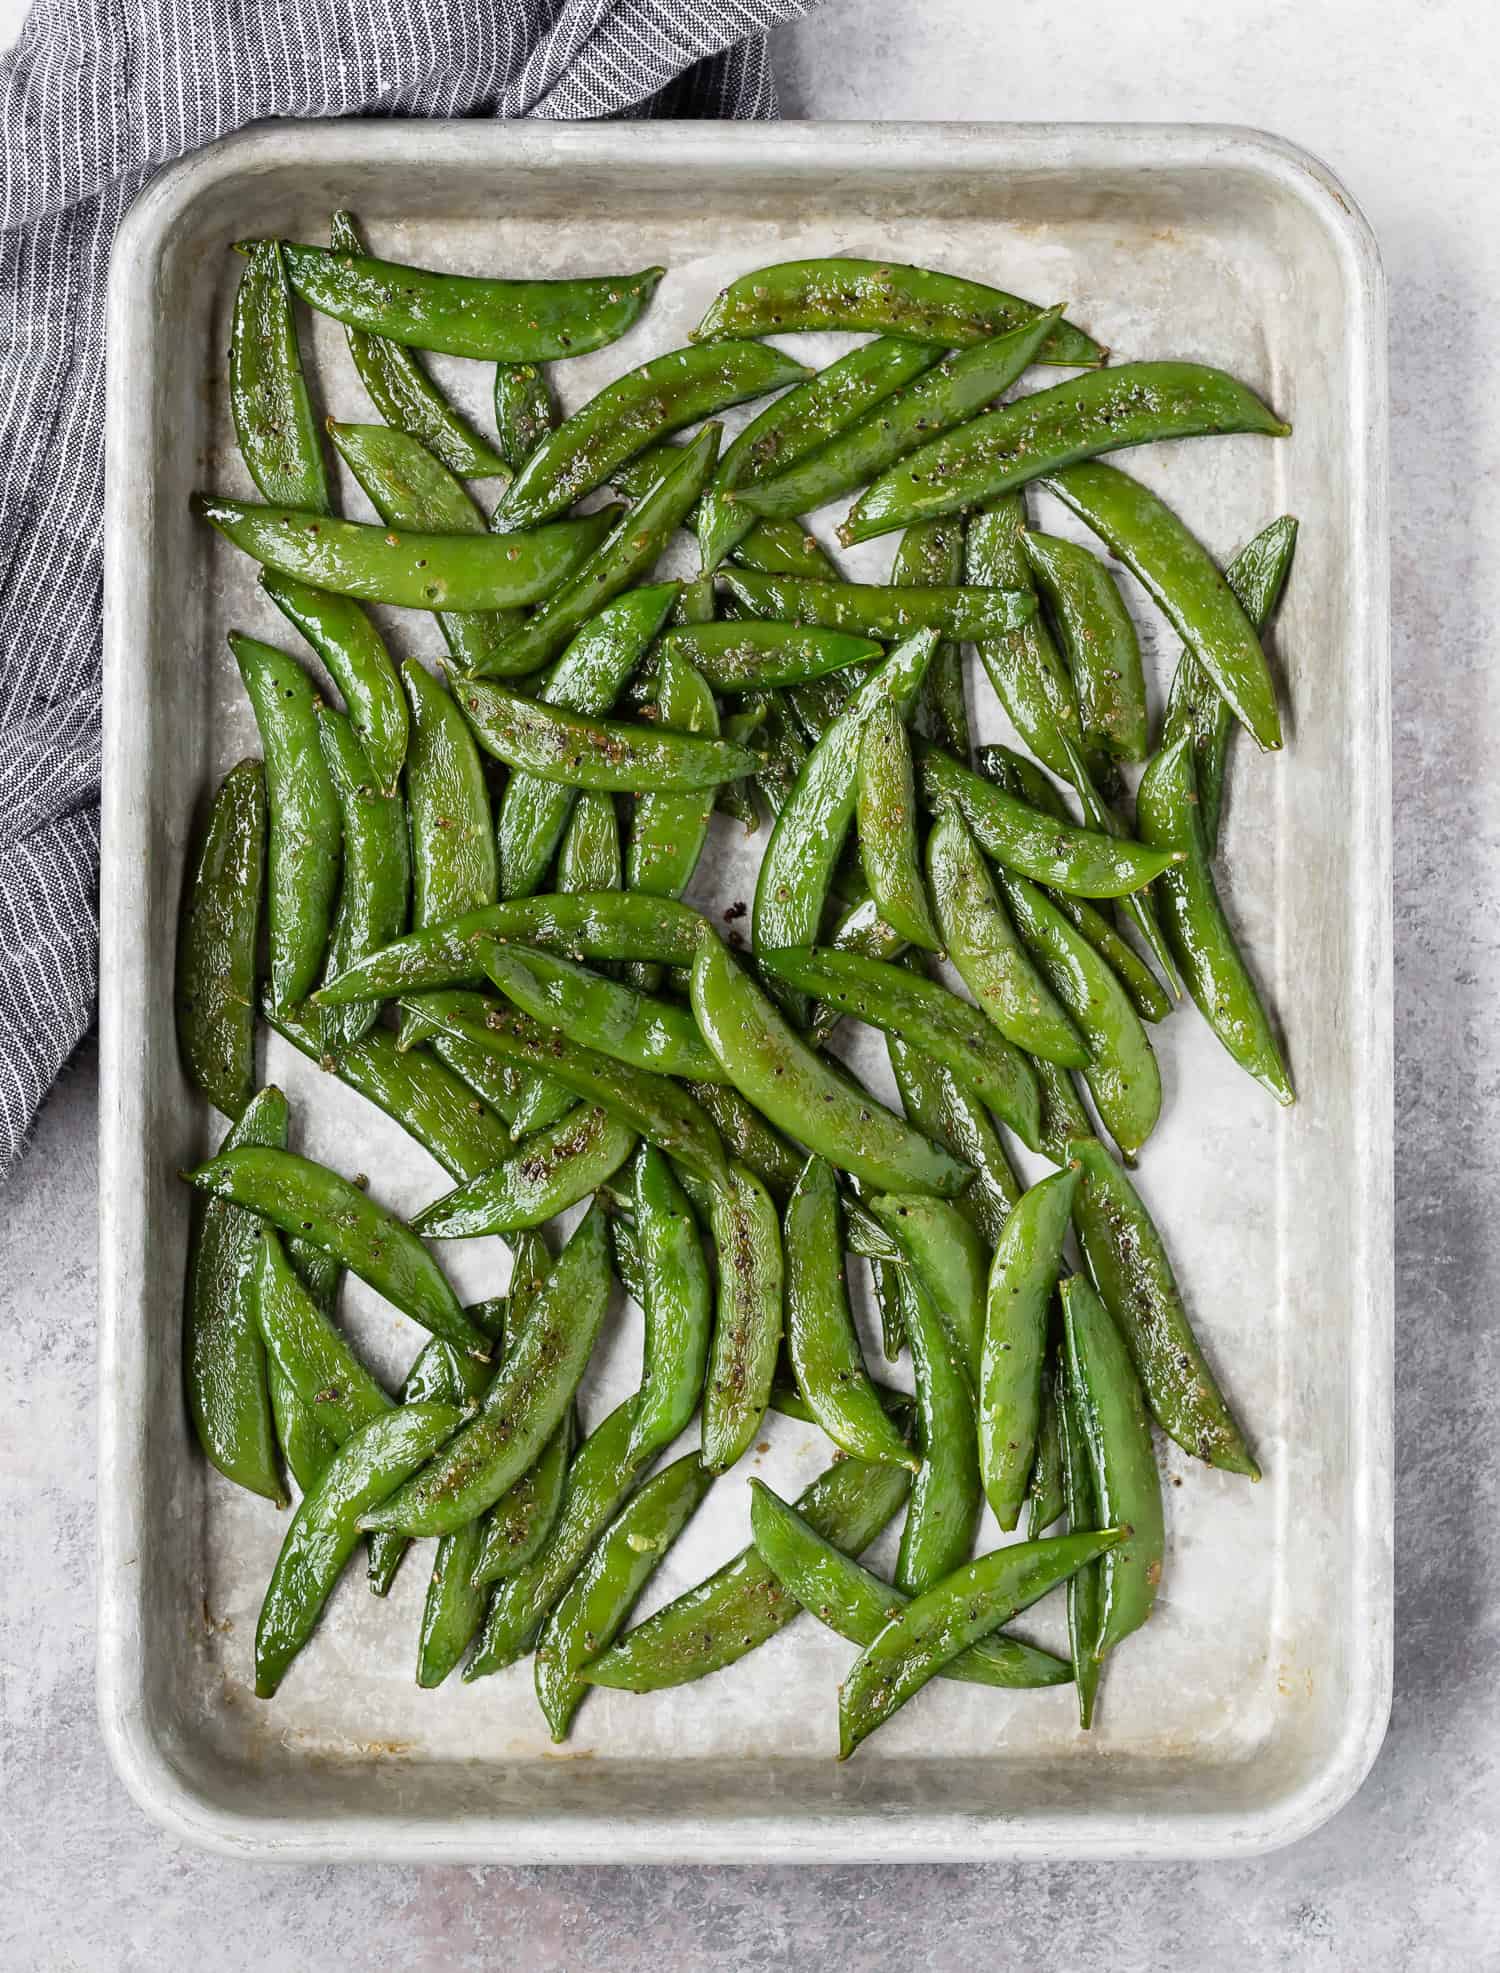 Overhead view of sheet pan with roasted sugar snap peas on it.